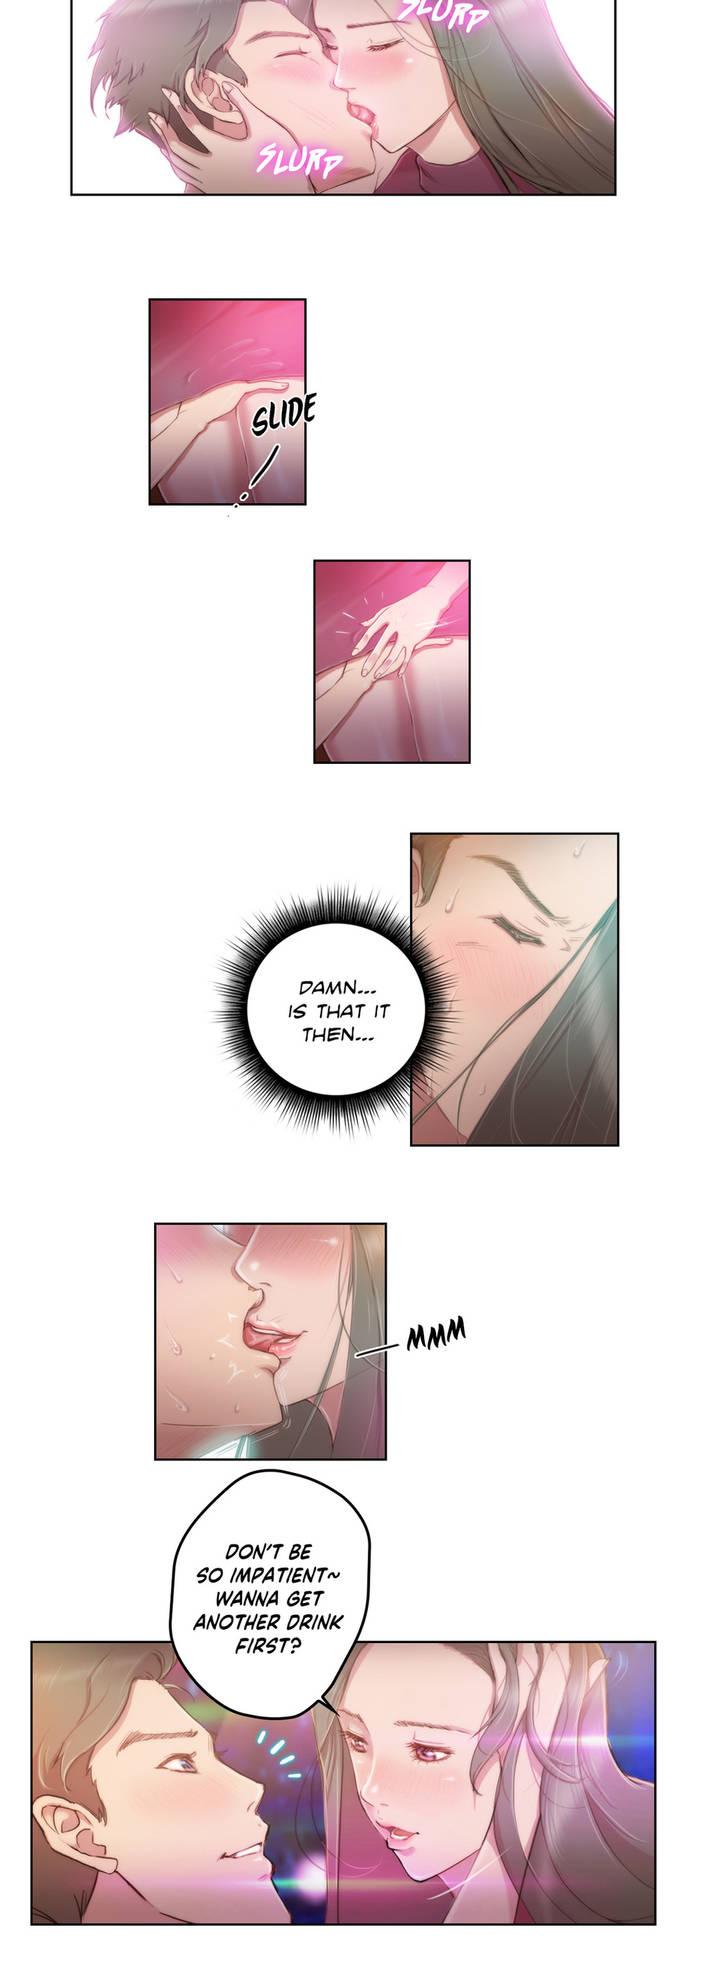 Foot [BYMAN] Sex Knights-Erotic Sensuality & Perception Ch.1-12 (English) (Ongoing) Piss - Page 4